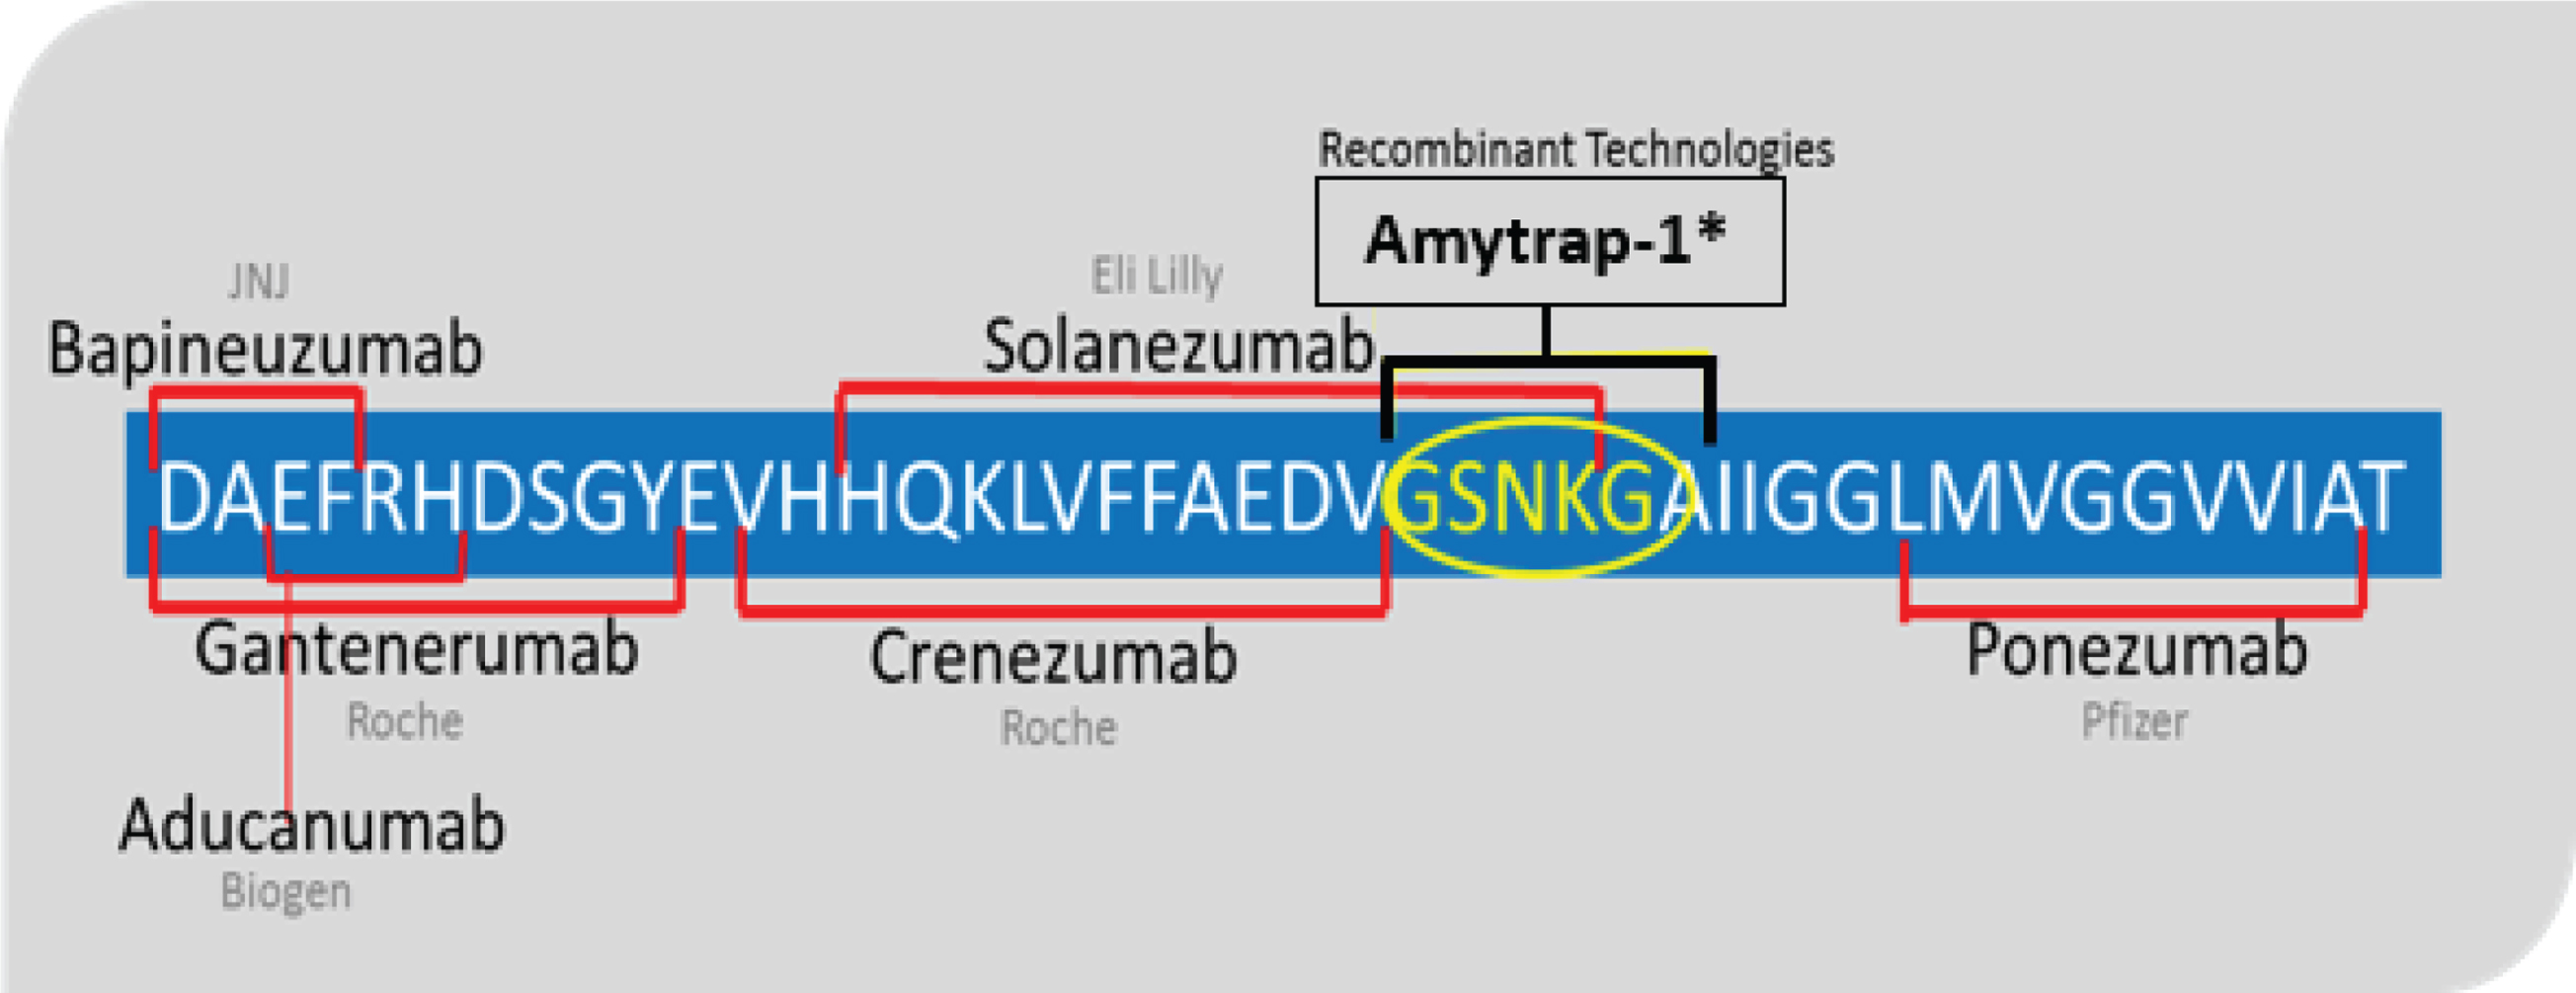 Aβ sequence and the binding sites. The diagram shows the binding regions of the anti-Aβ antibodies (red) and the Amytrap-1 (yellow) in Aβ. The region (the circled amino acids) where the AmyTrap-1 peptide binds has been shown to promote hair-pin formation of toxic Aβ [17].